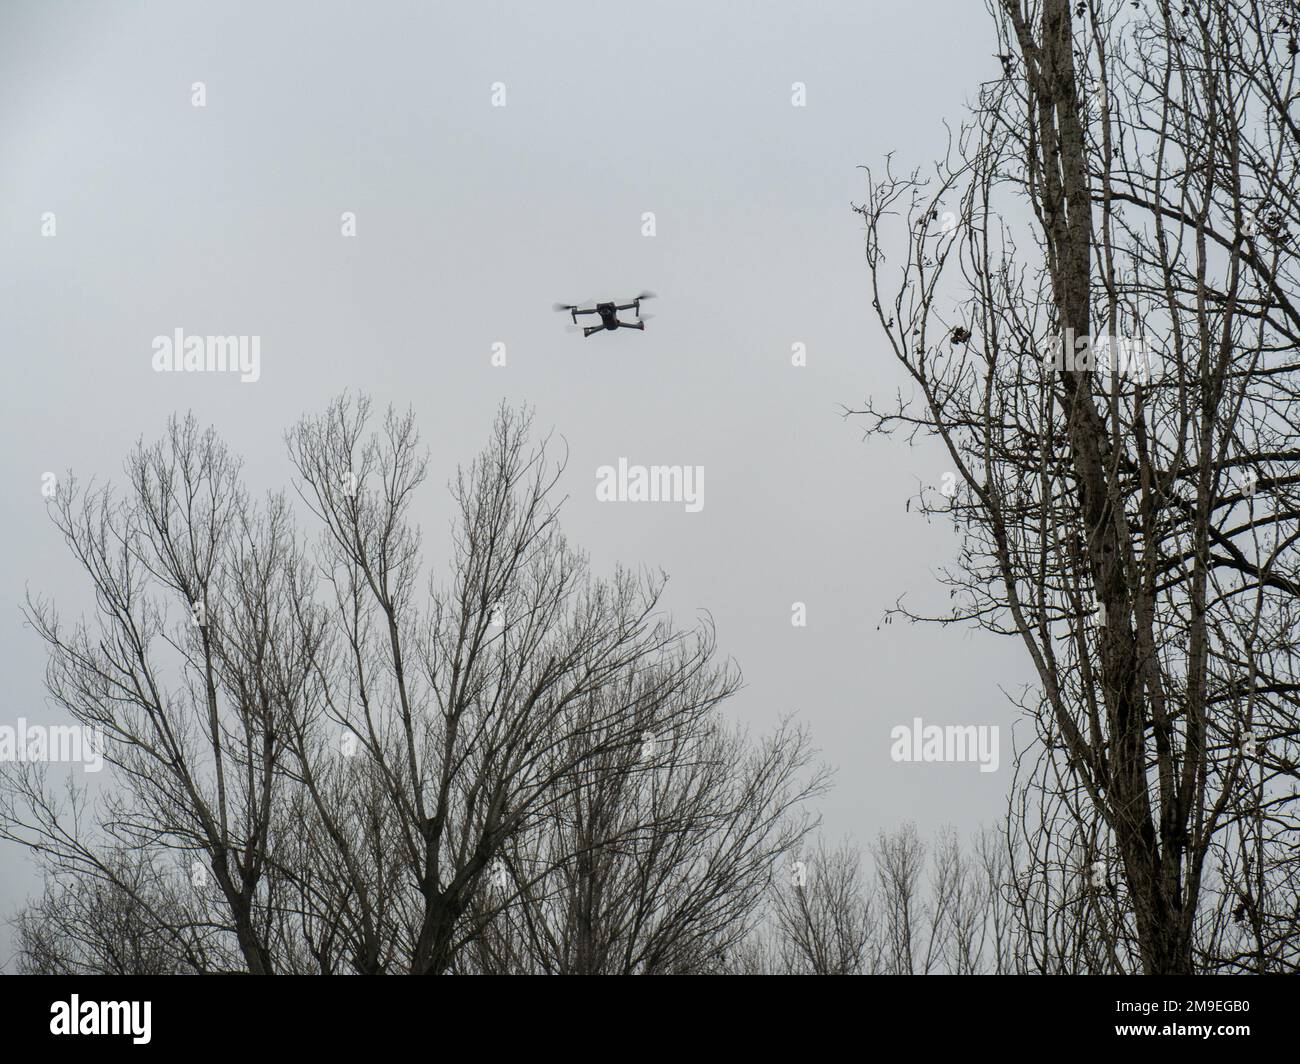 Lombardy, Italy - 6th January 2022 DJI Mavic Air 2s drone 4k camera copter  flying hovering in a park a cloudy day Stock Photo - Alamy